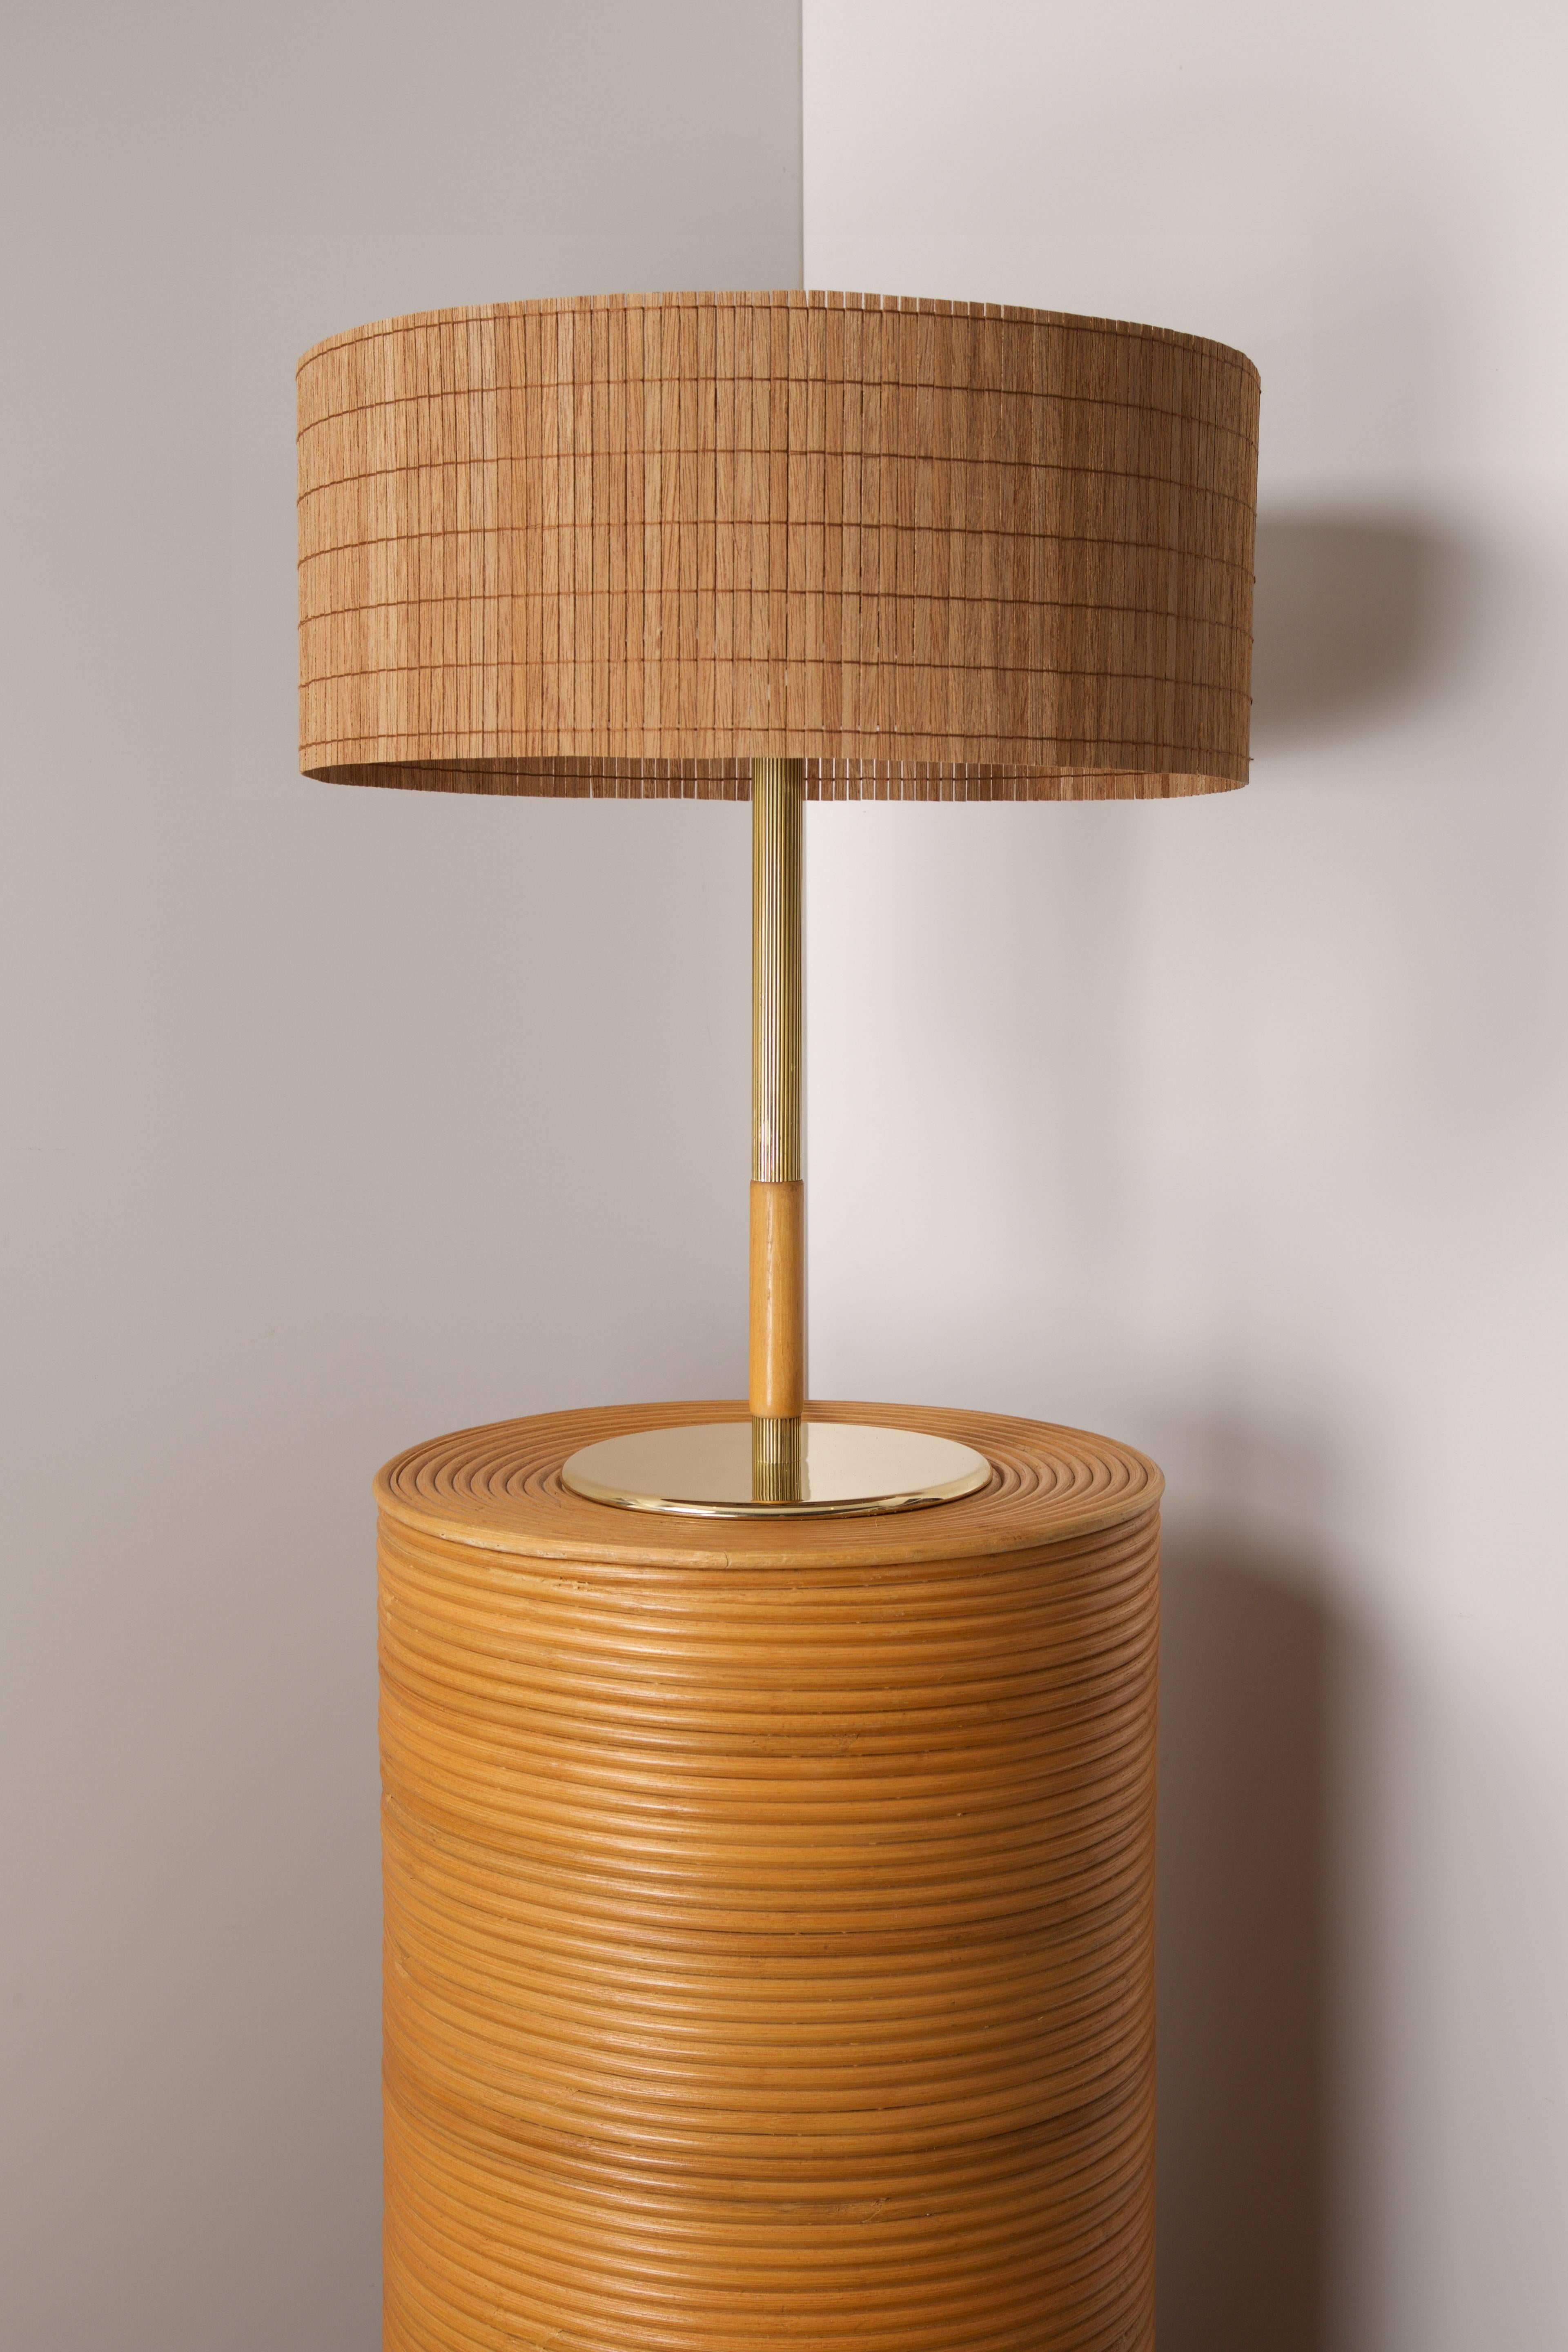 Metal Paavo Tynell Table Lamp, Model 9206, Taito Oy, Finland, 1940s